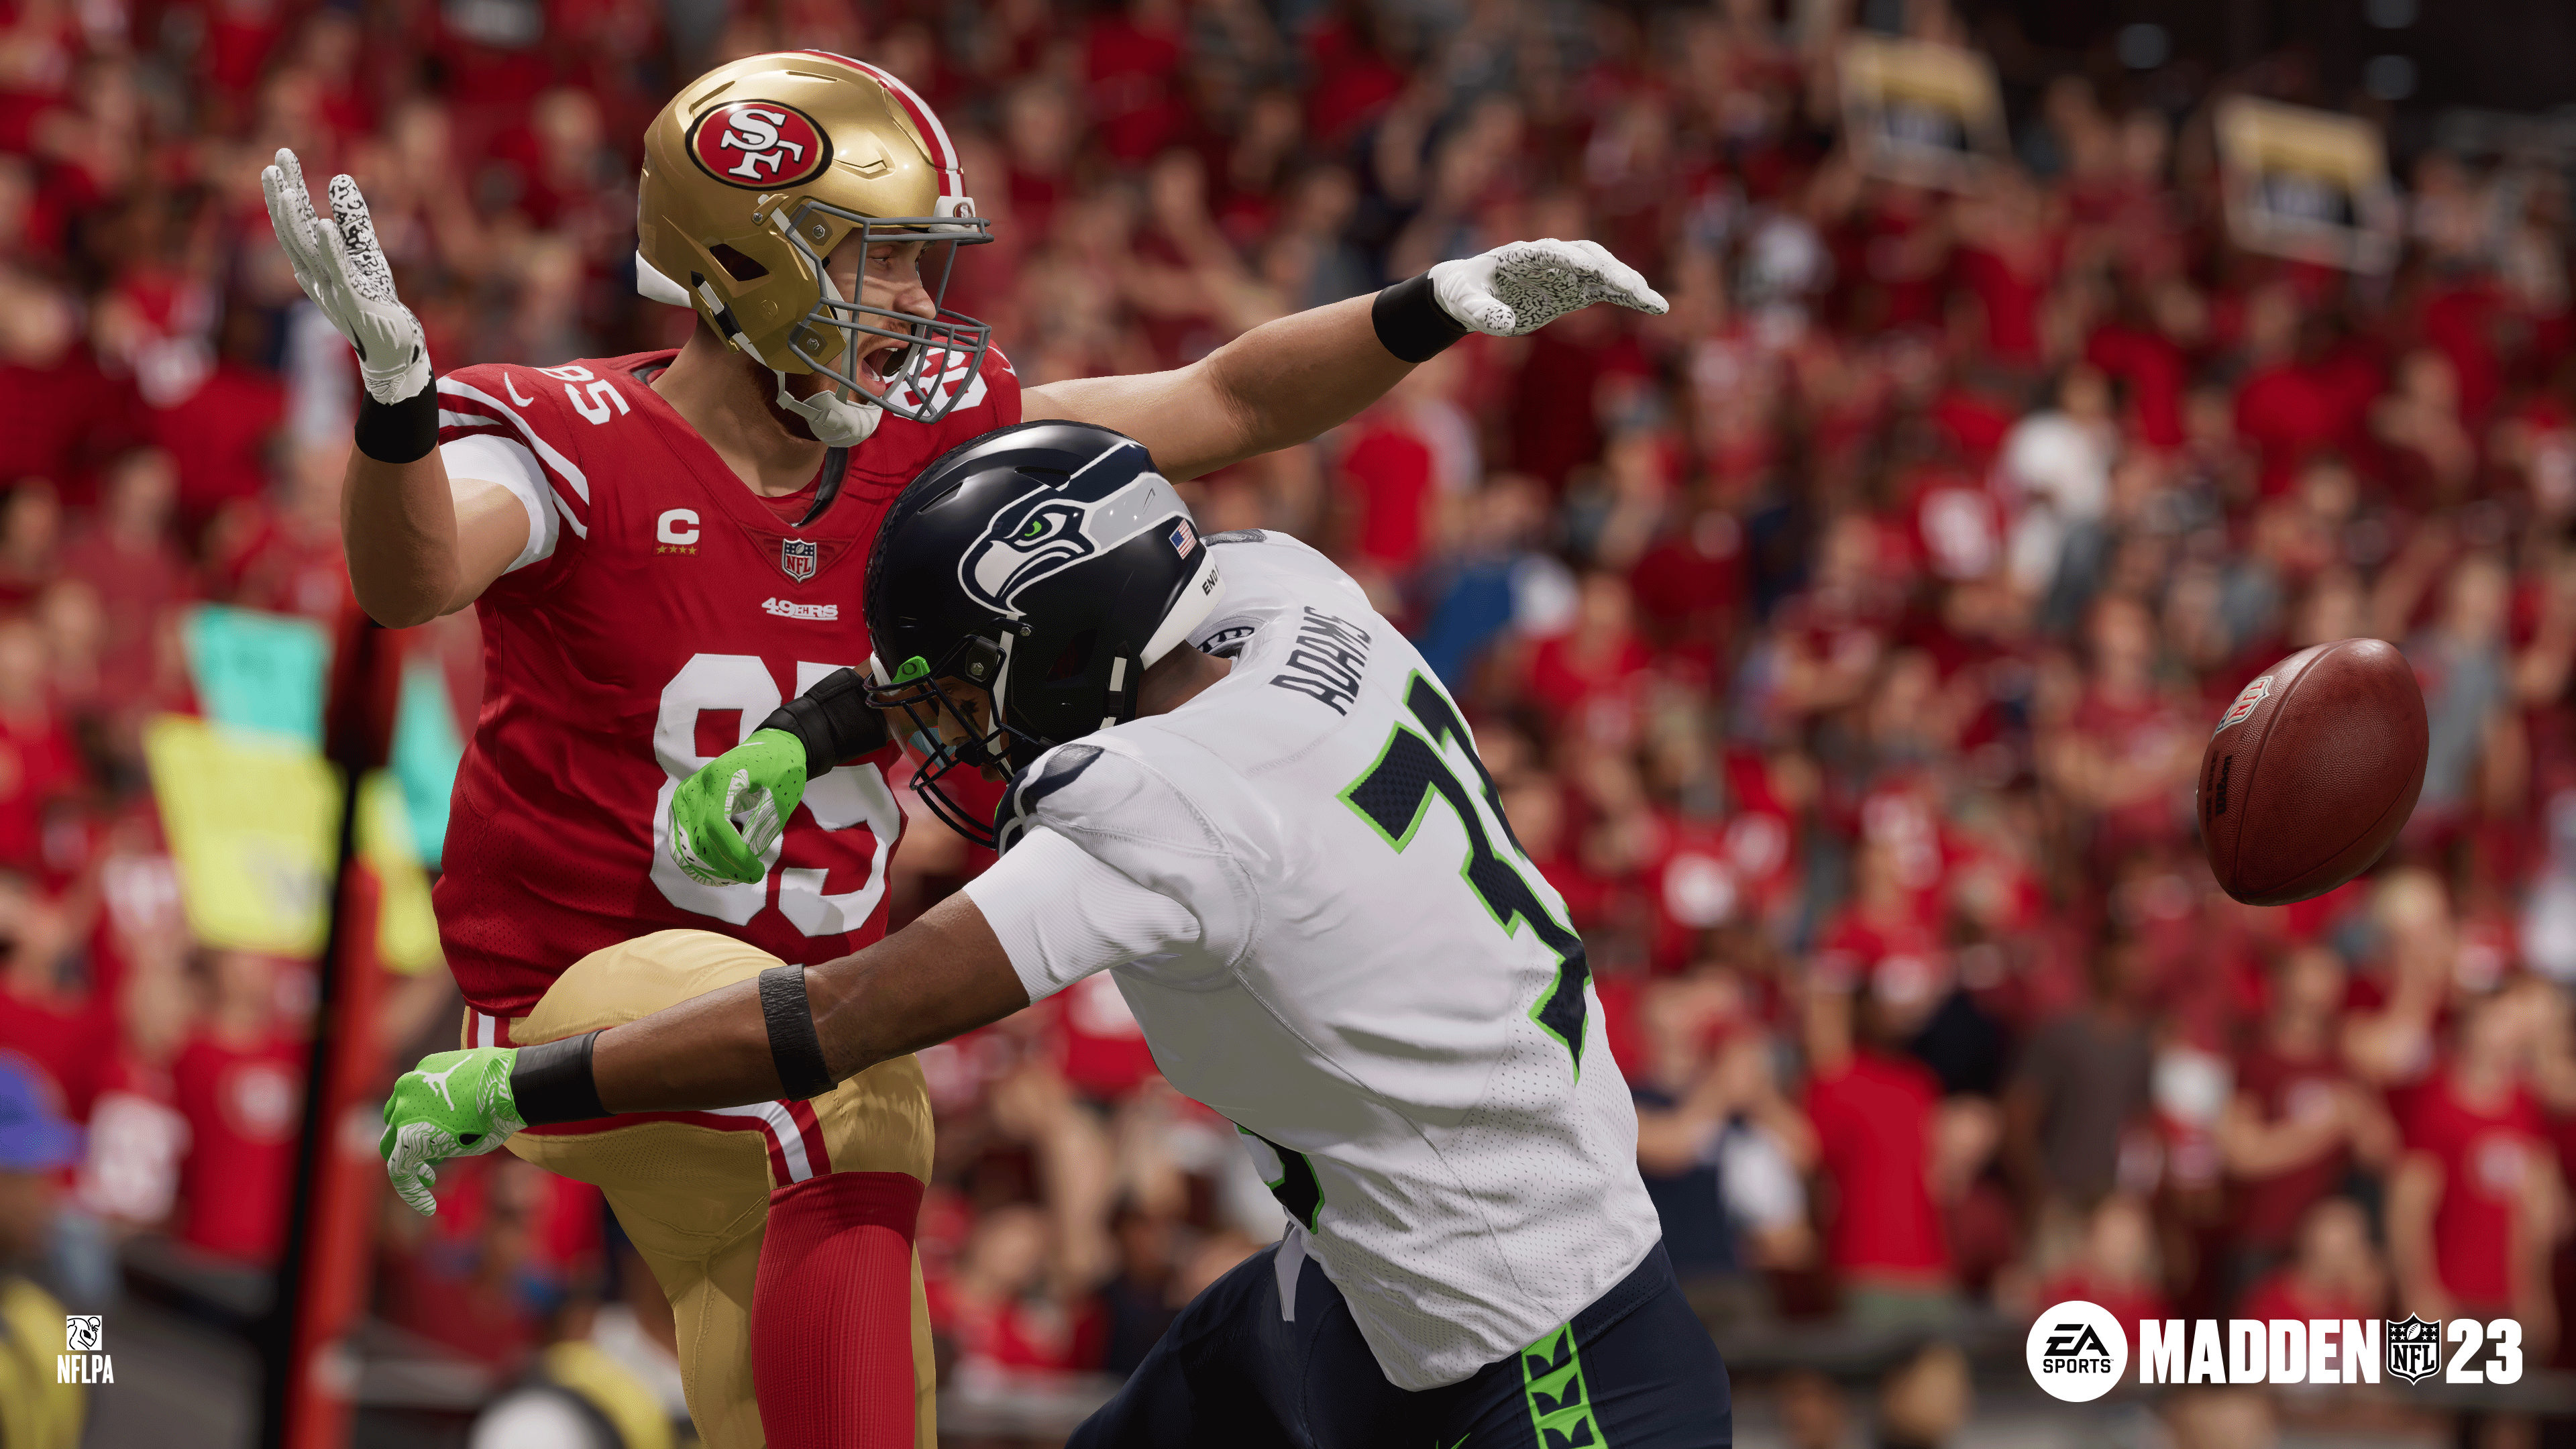 San Francisco tight end George Kittle is hit by Seattle defensive back Jamal Adams, knocking the ball free (at right) in Madden NFL 23